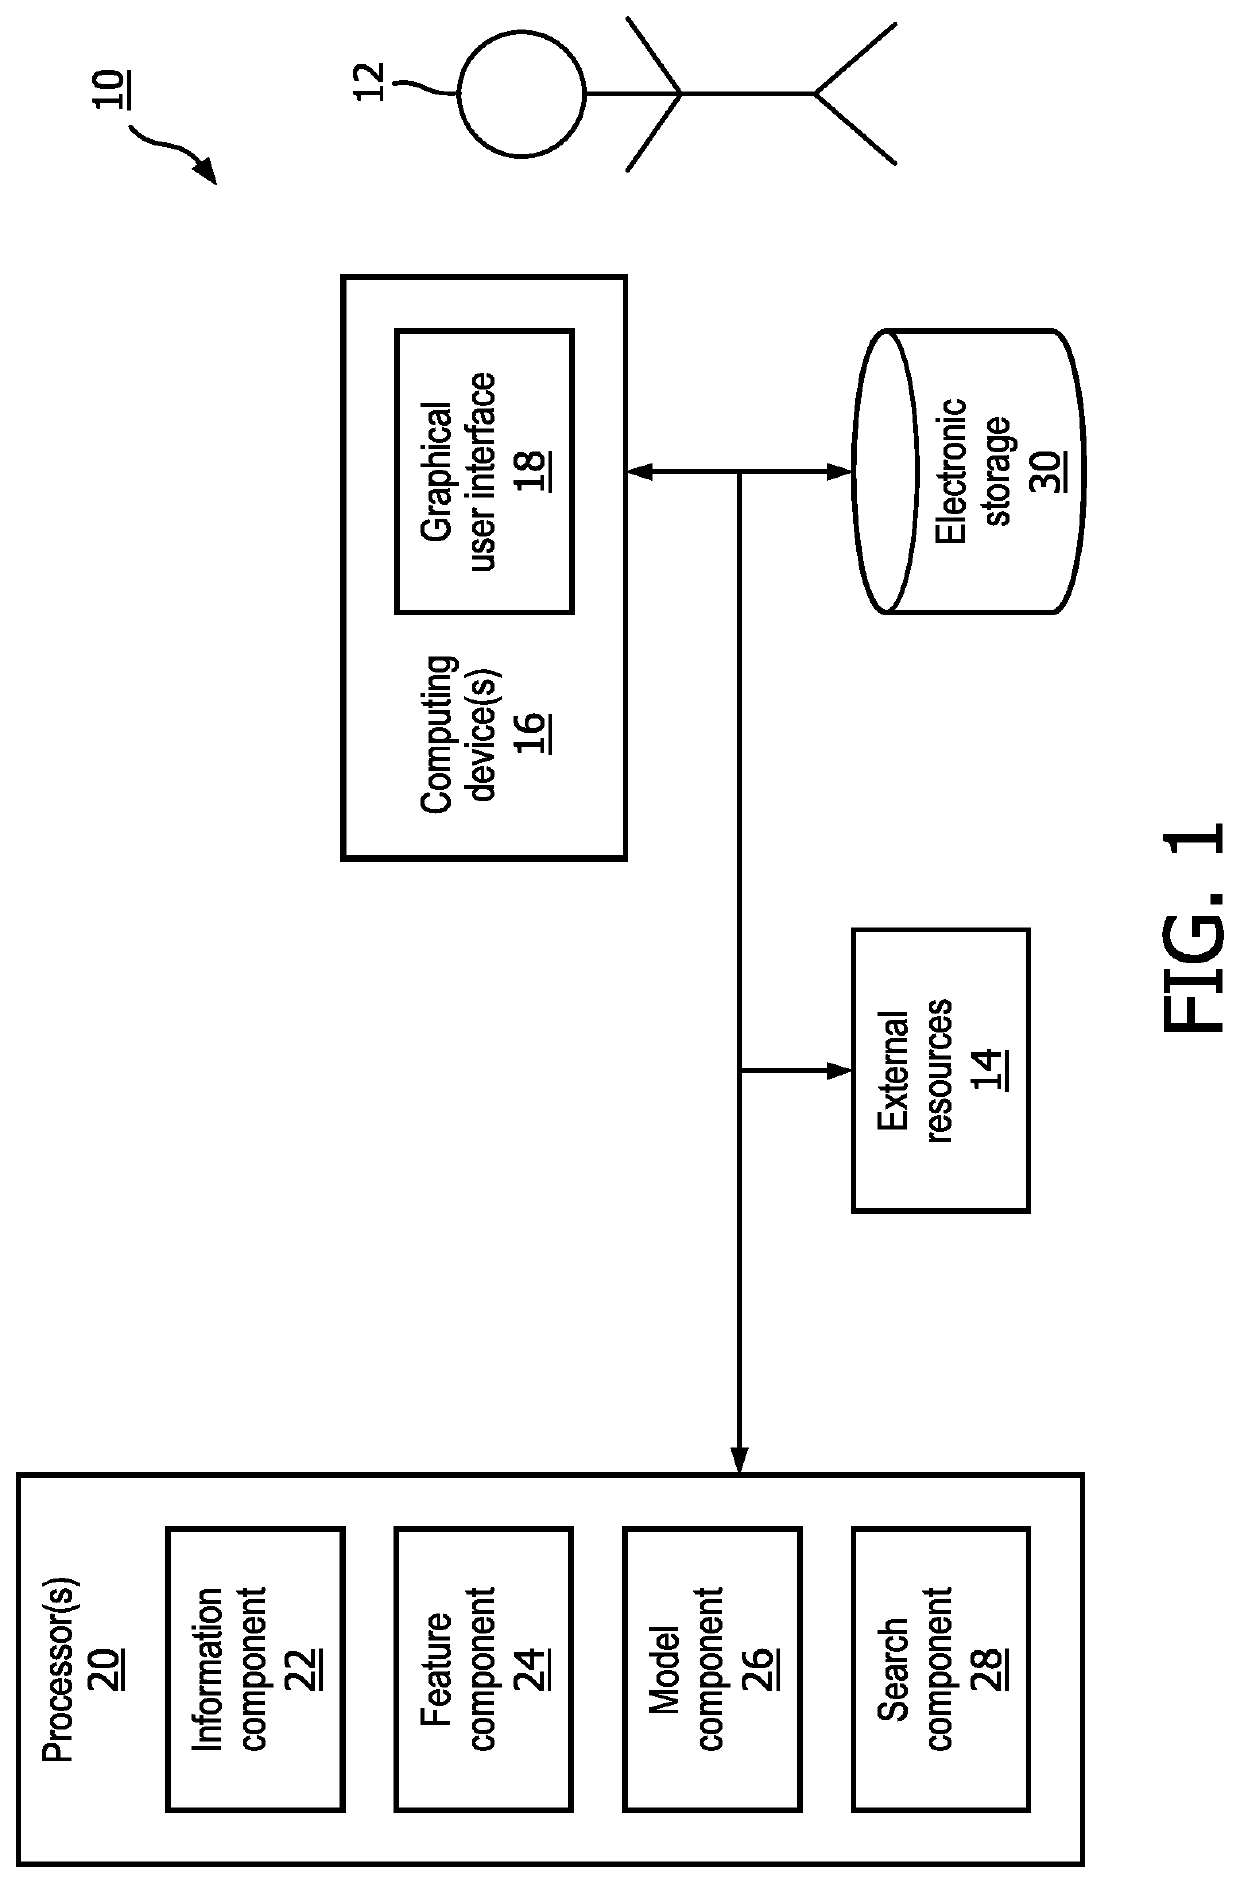 System and method for generating a care services combination for a user